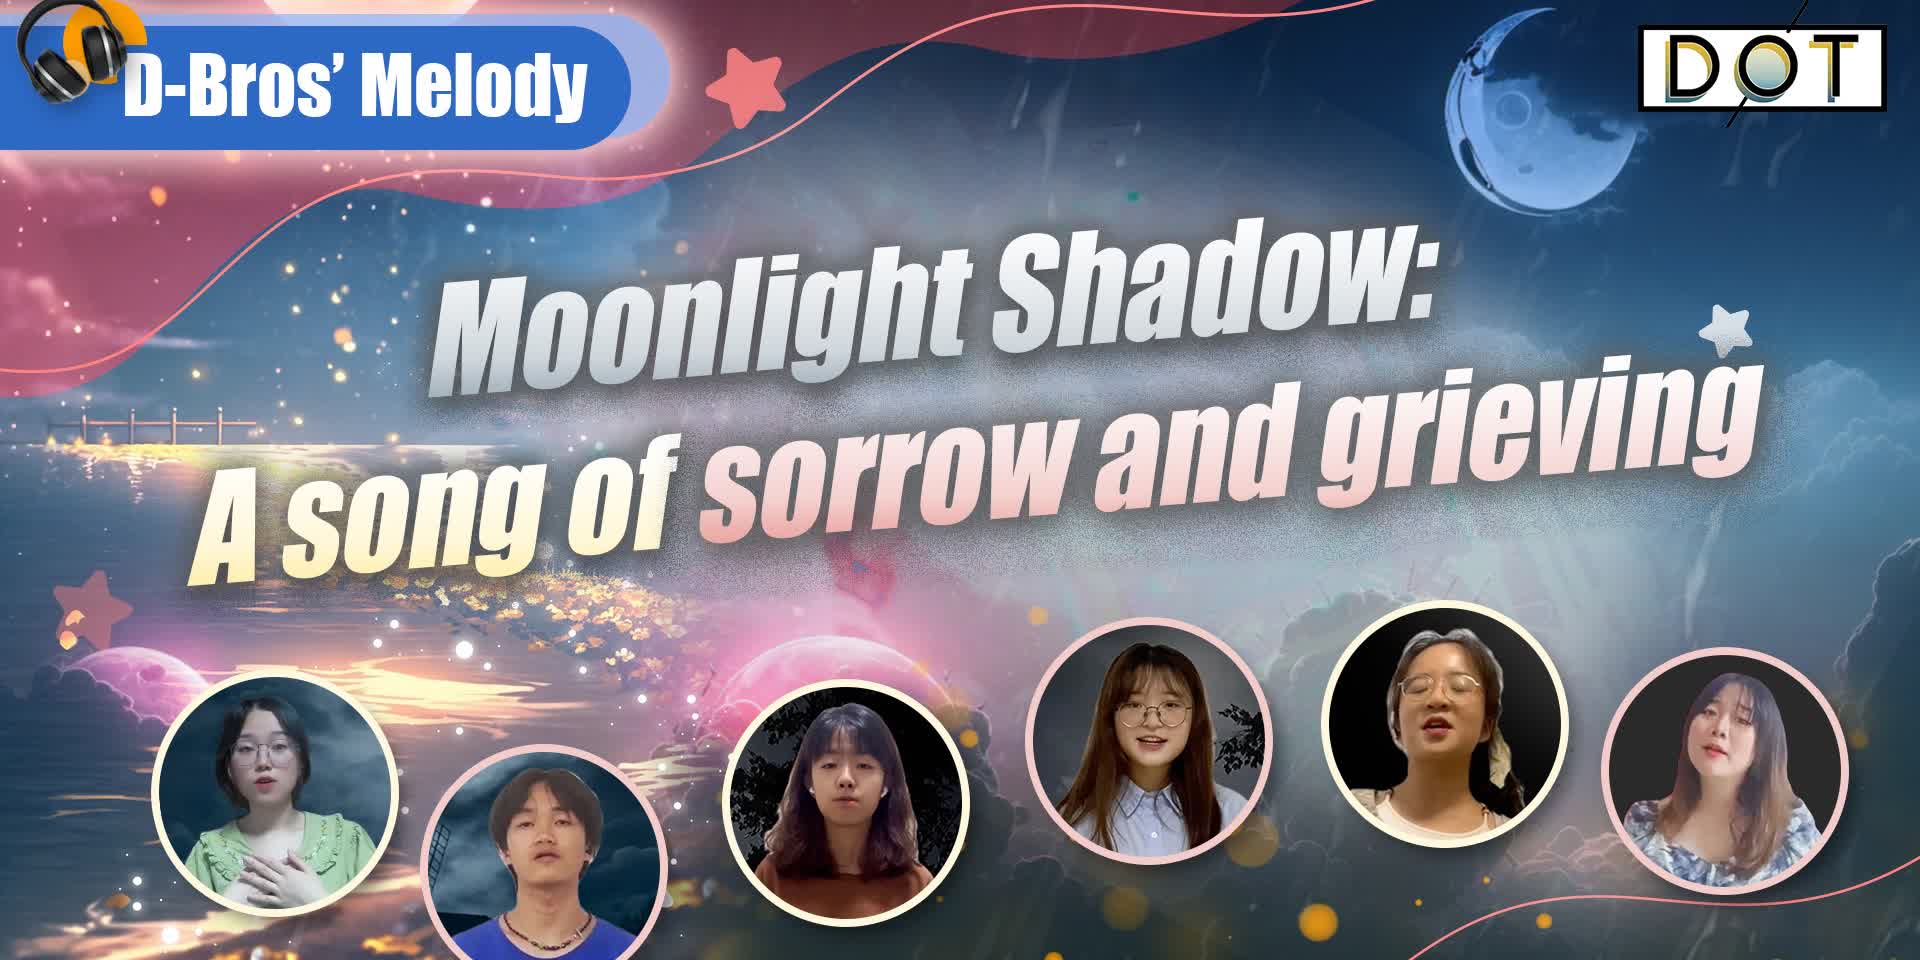 D-Bros' Melodies SP1 | Moonlight Shadow: A song of sorrow and grieving